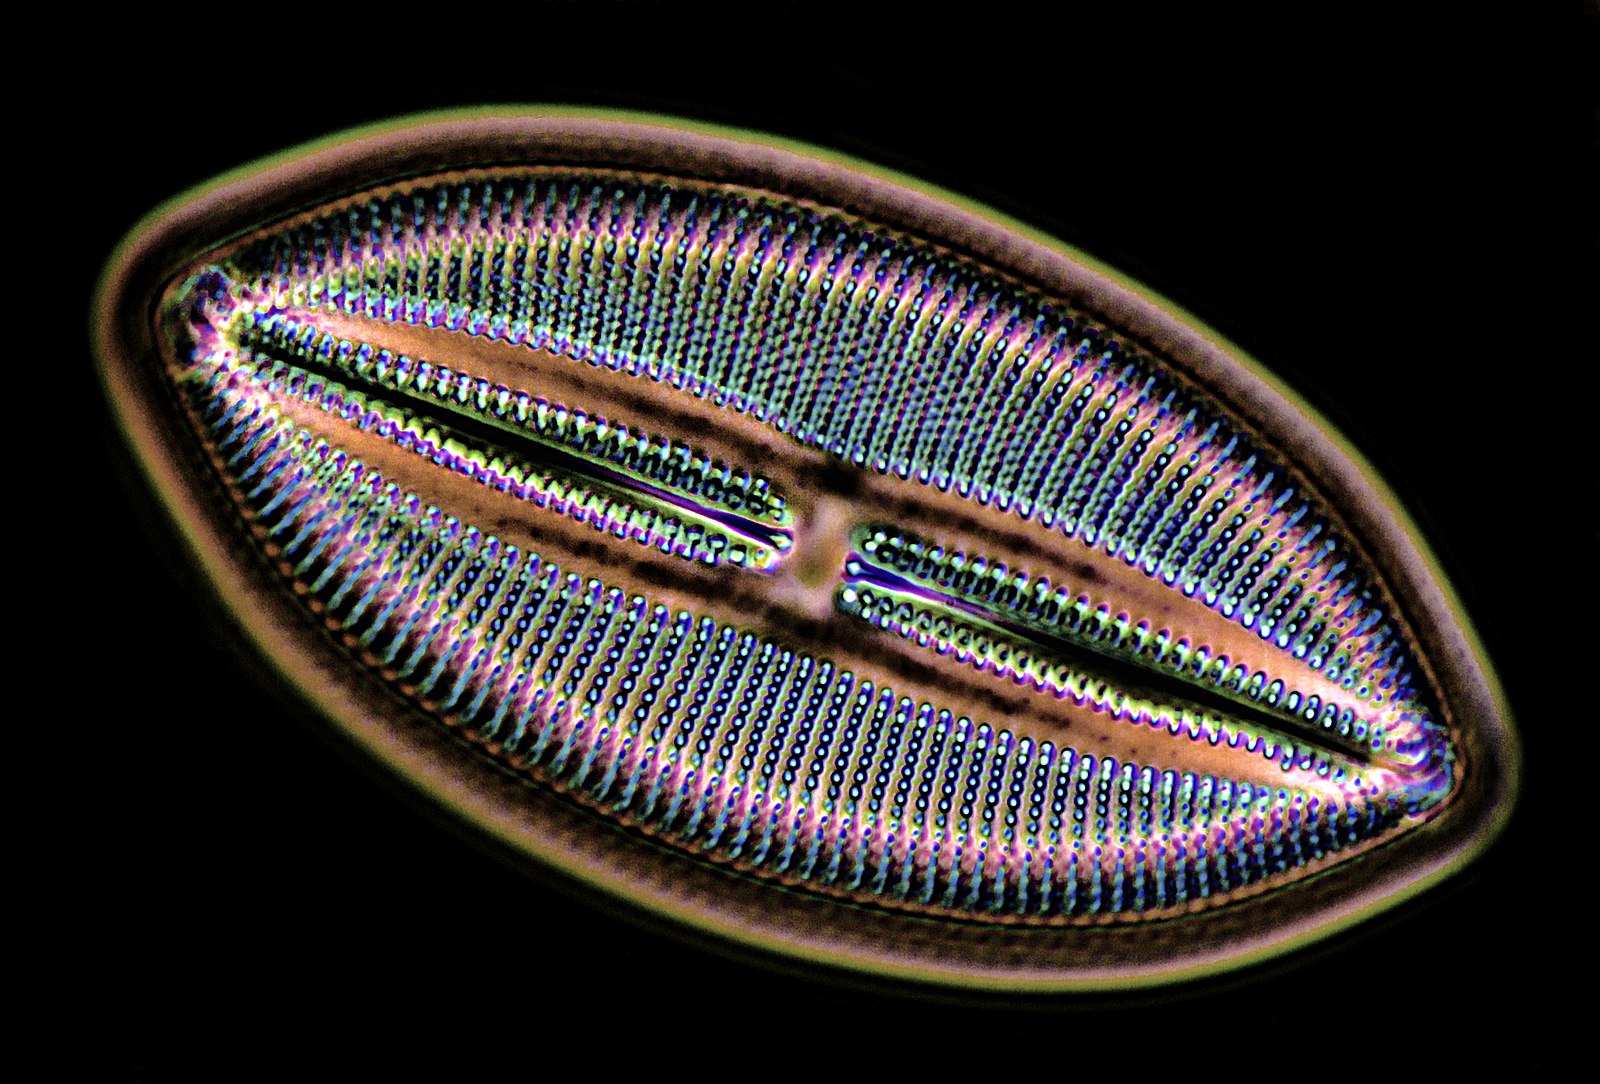 Incredible detail of an opalized silica frustule under 1500x magnification.